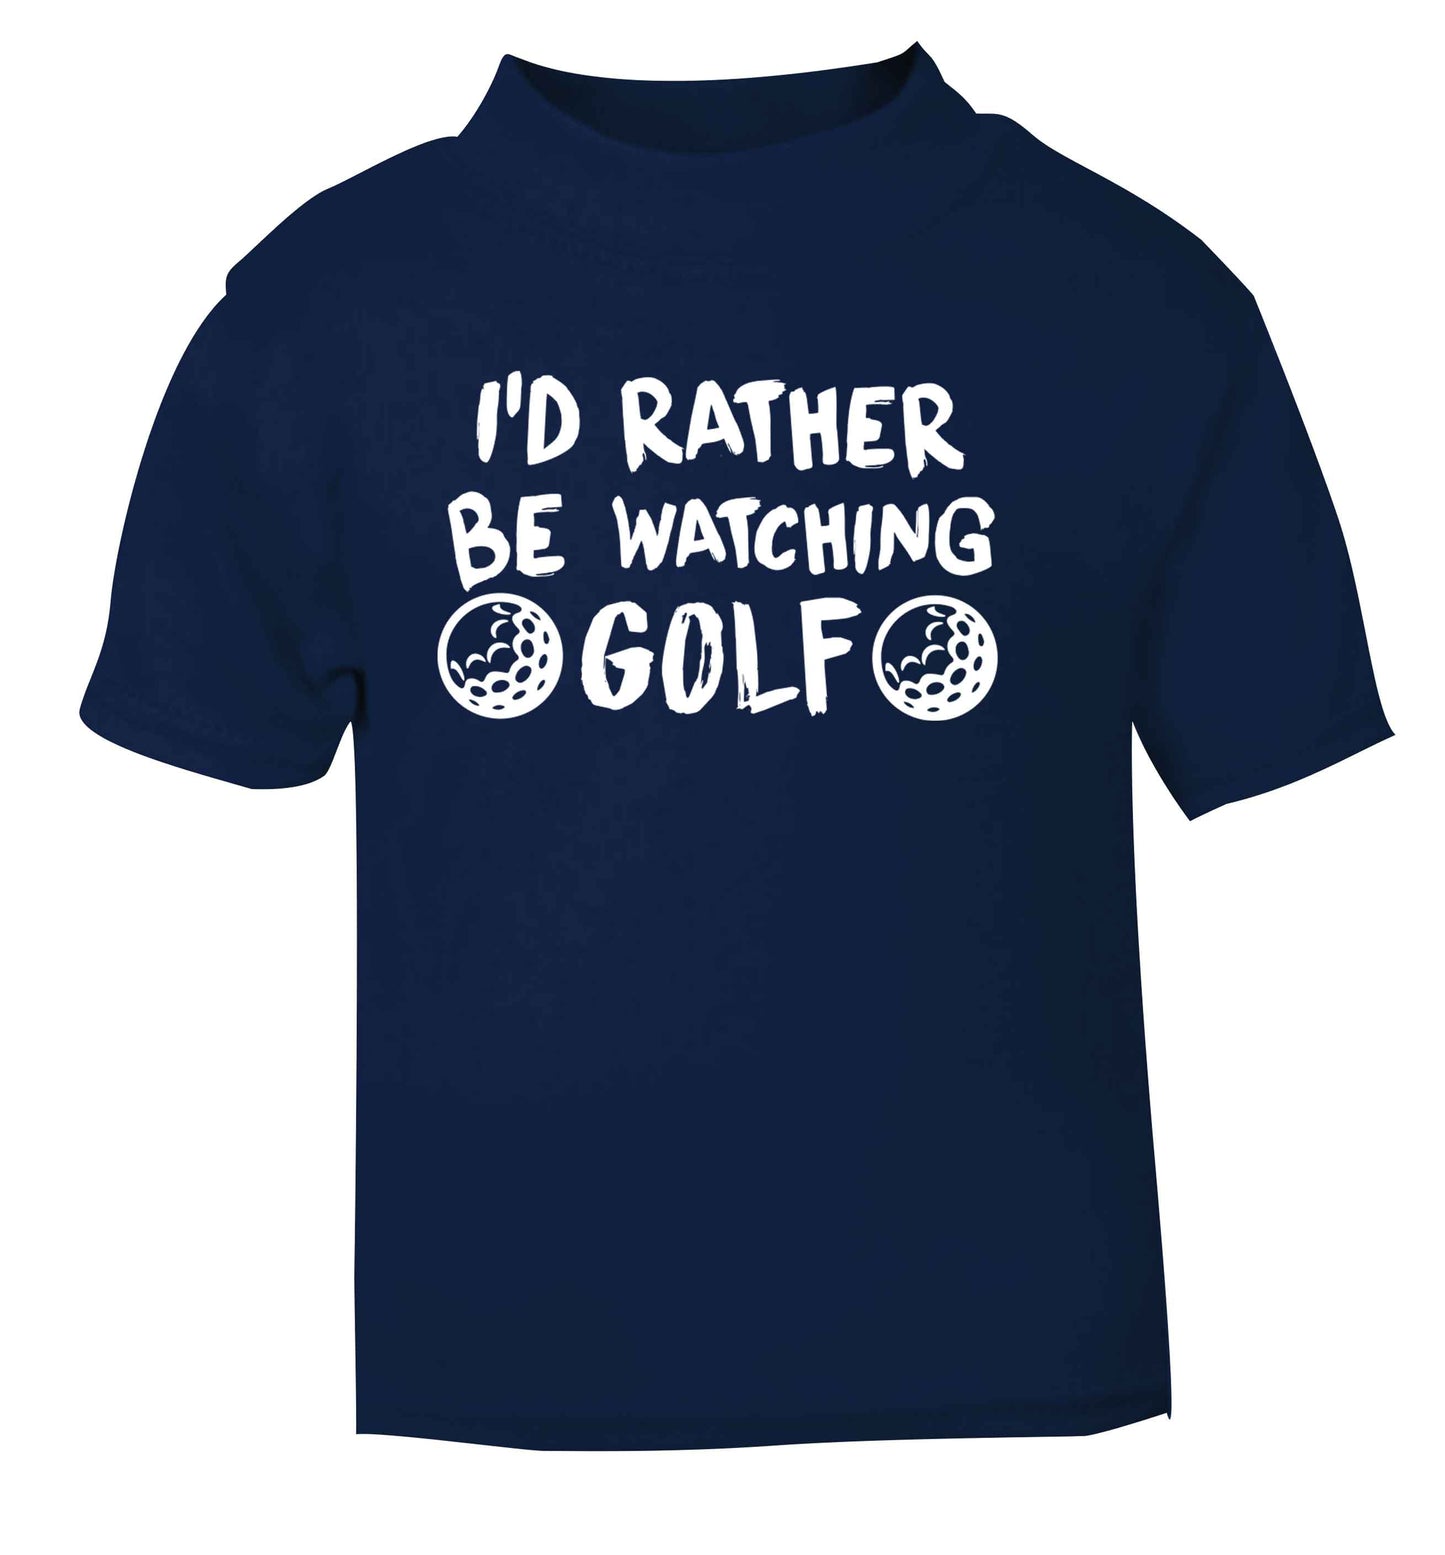 I'd rather be watching golf navy Baby Toddler Tshirt 2 Years